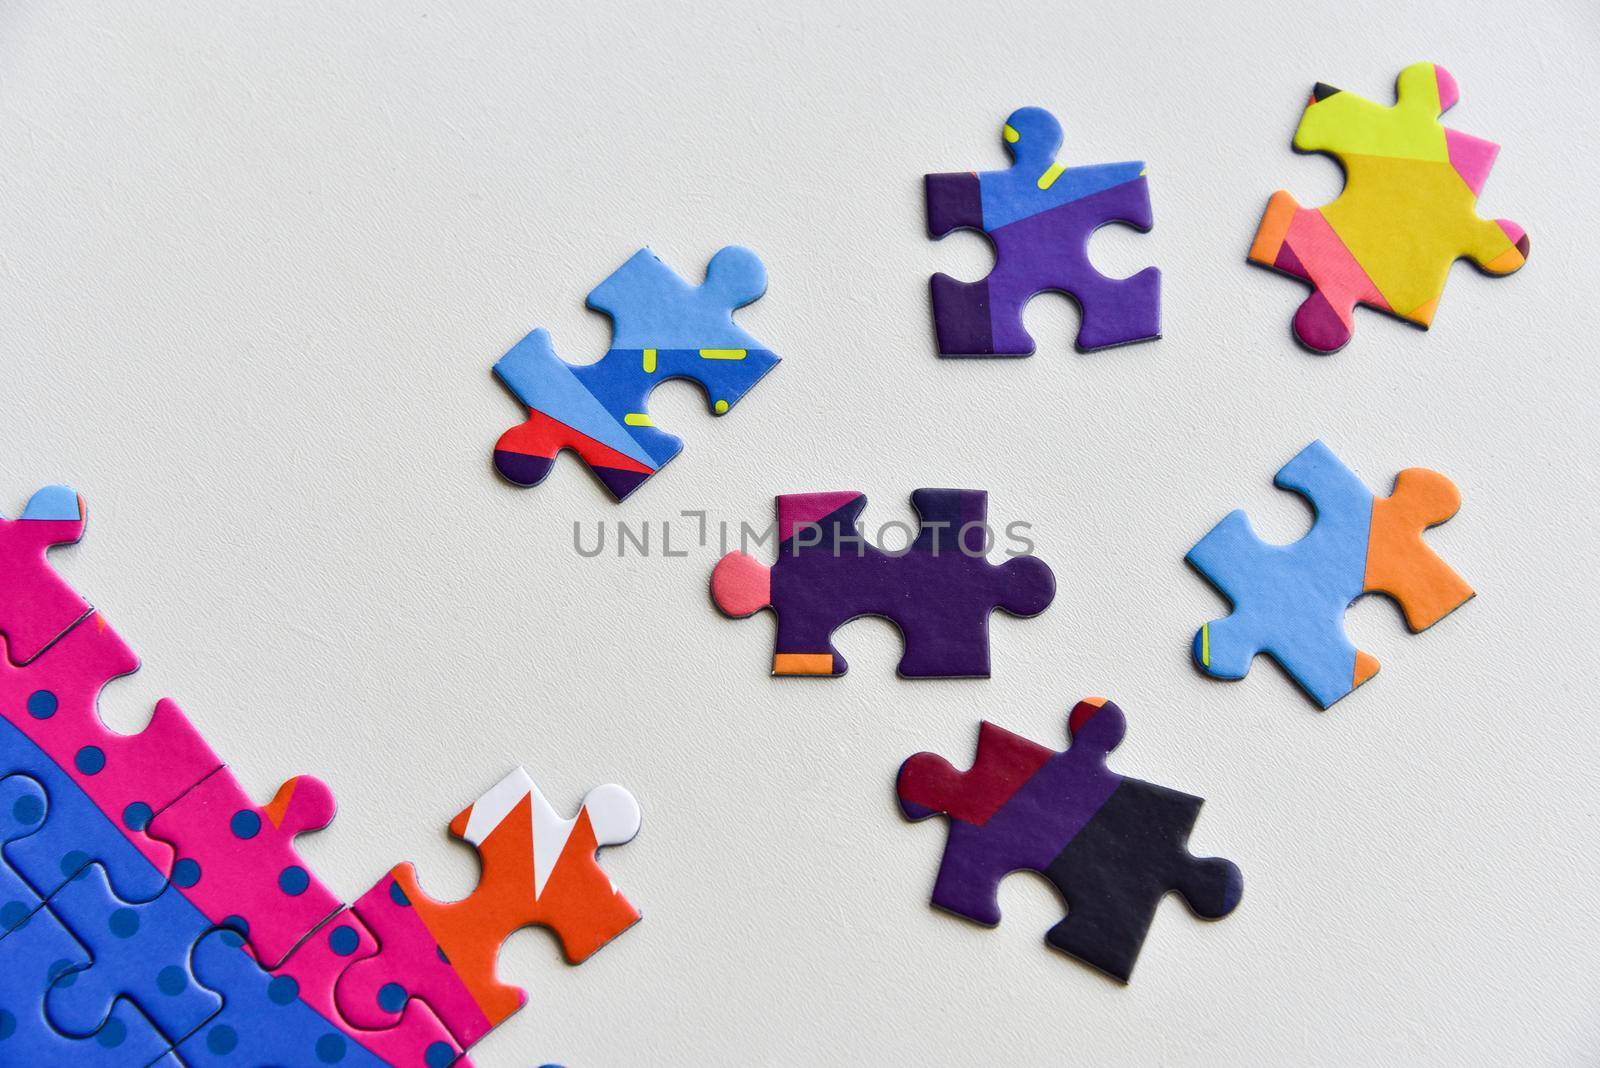 Fragment of a folded jigsaw puzzle and a pile of uncombed puzzle elements against the background of a white surface.